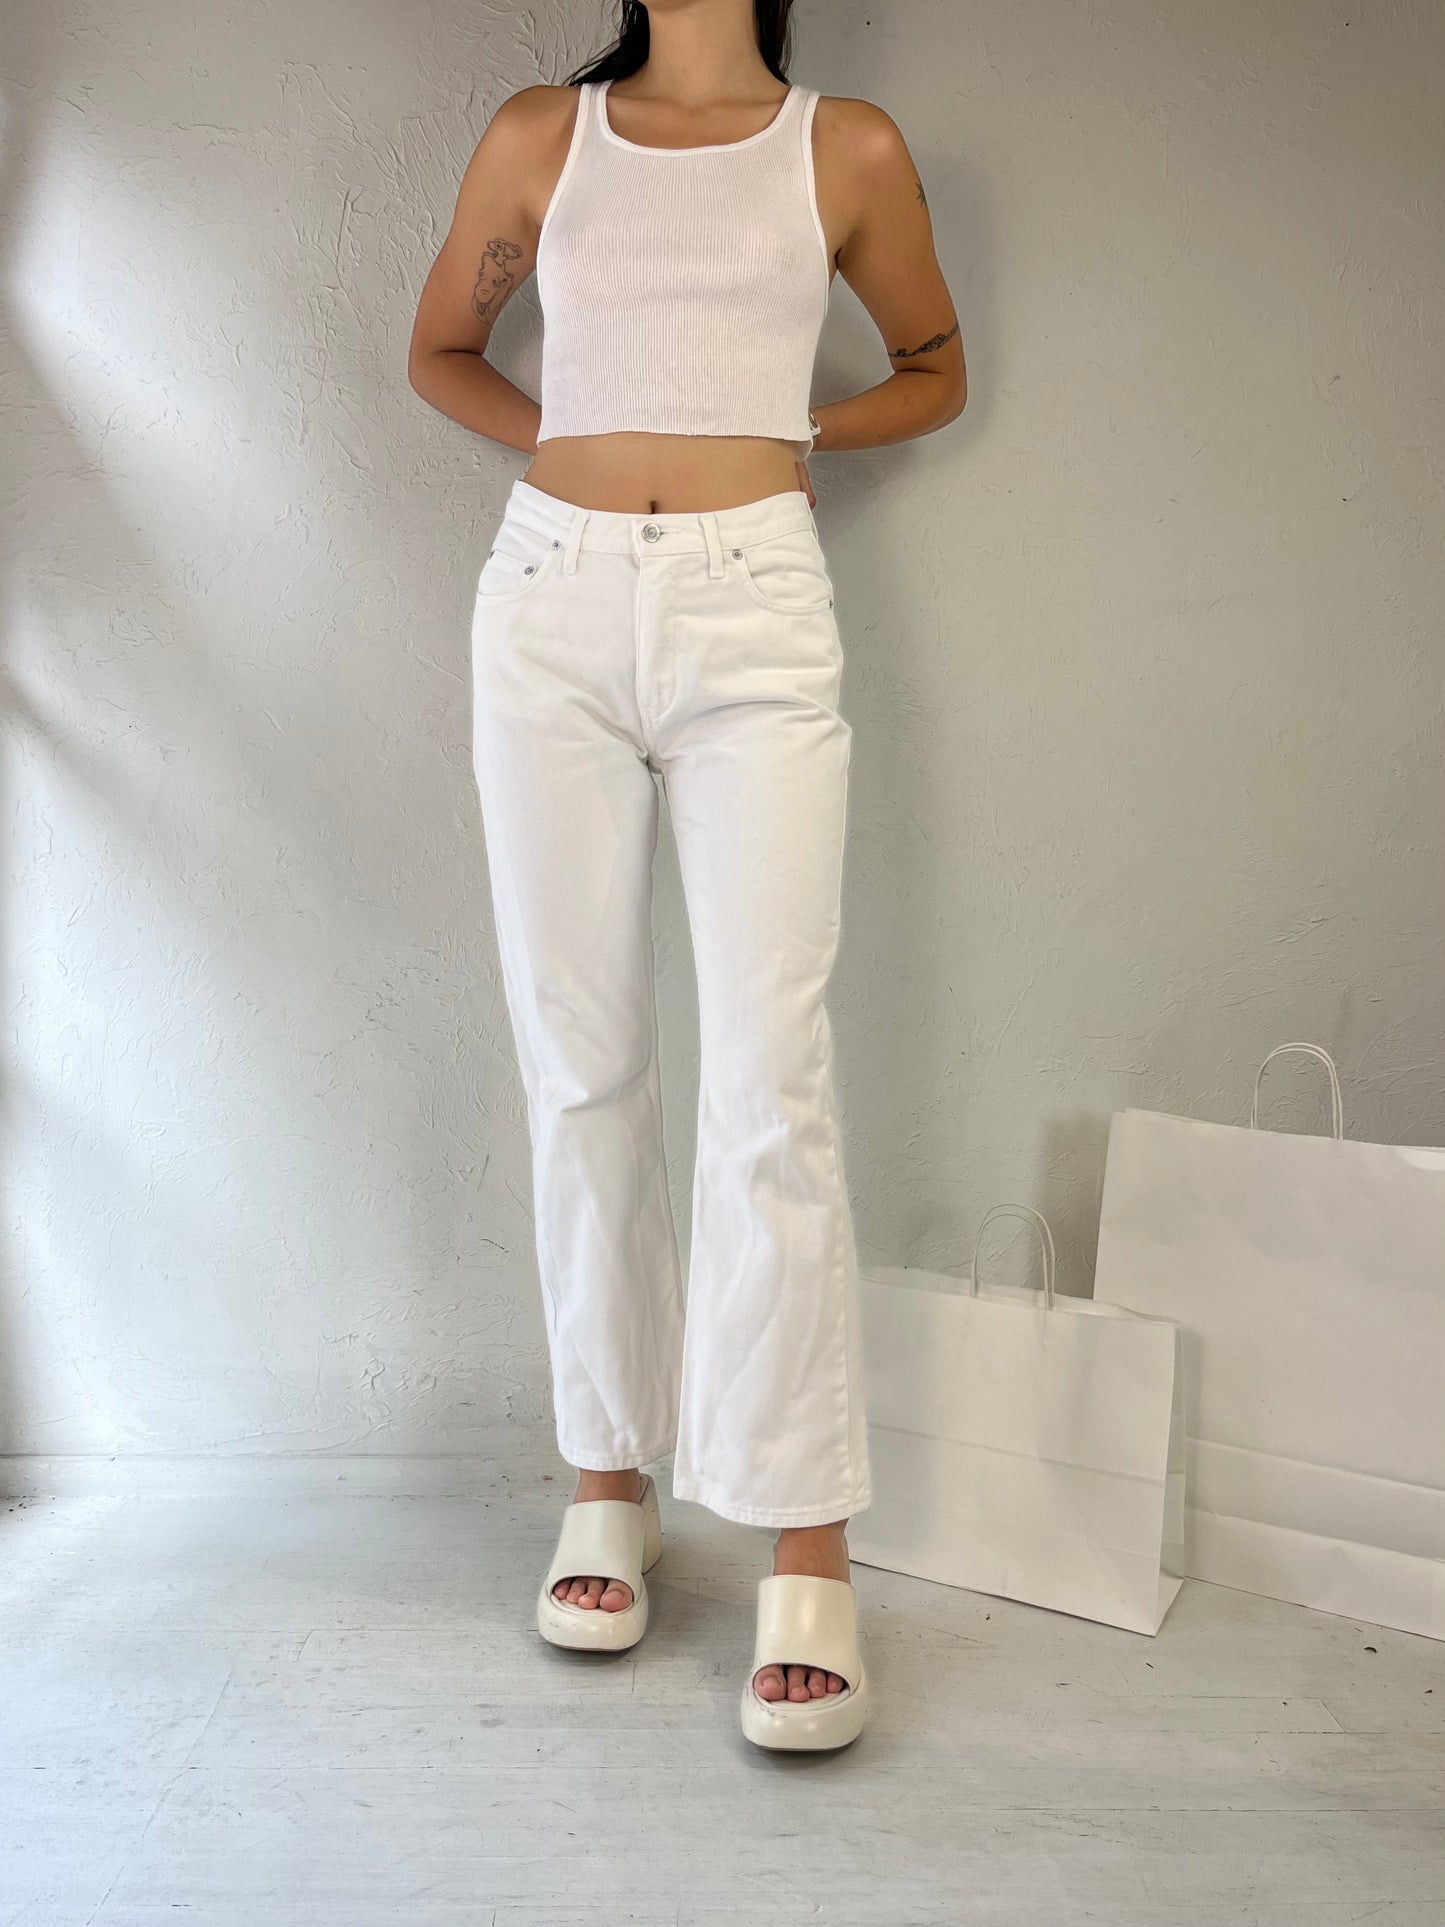 90s 'Guess' White Tapered Jeans / Made in Canada / 28